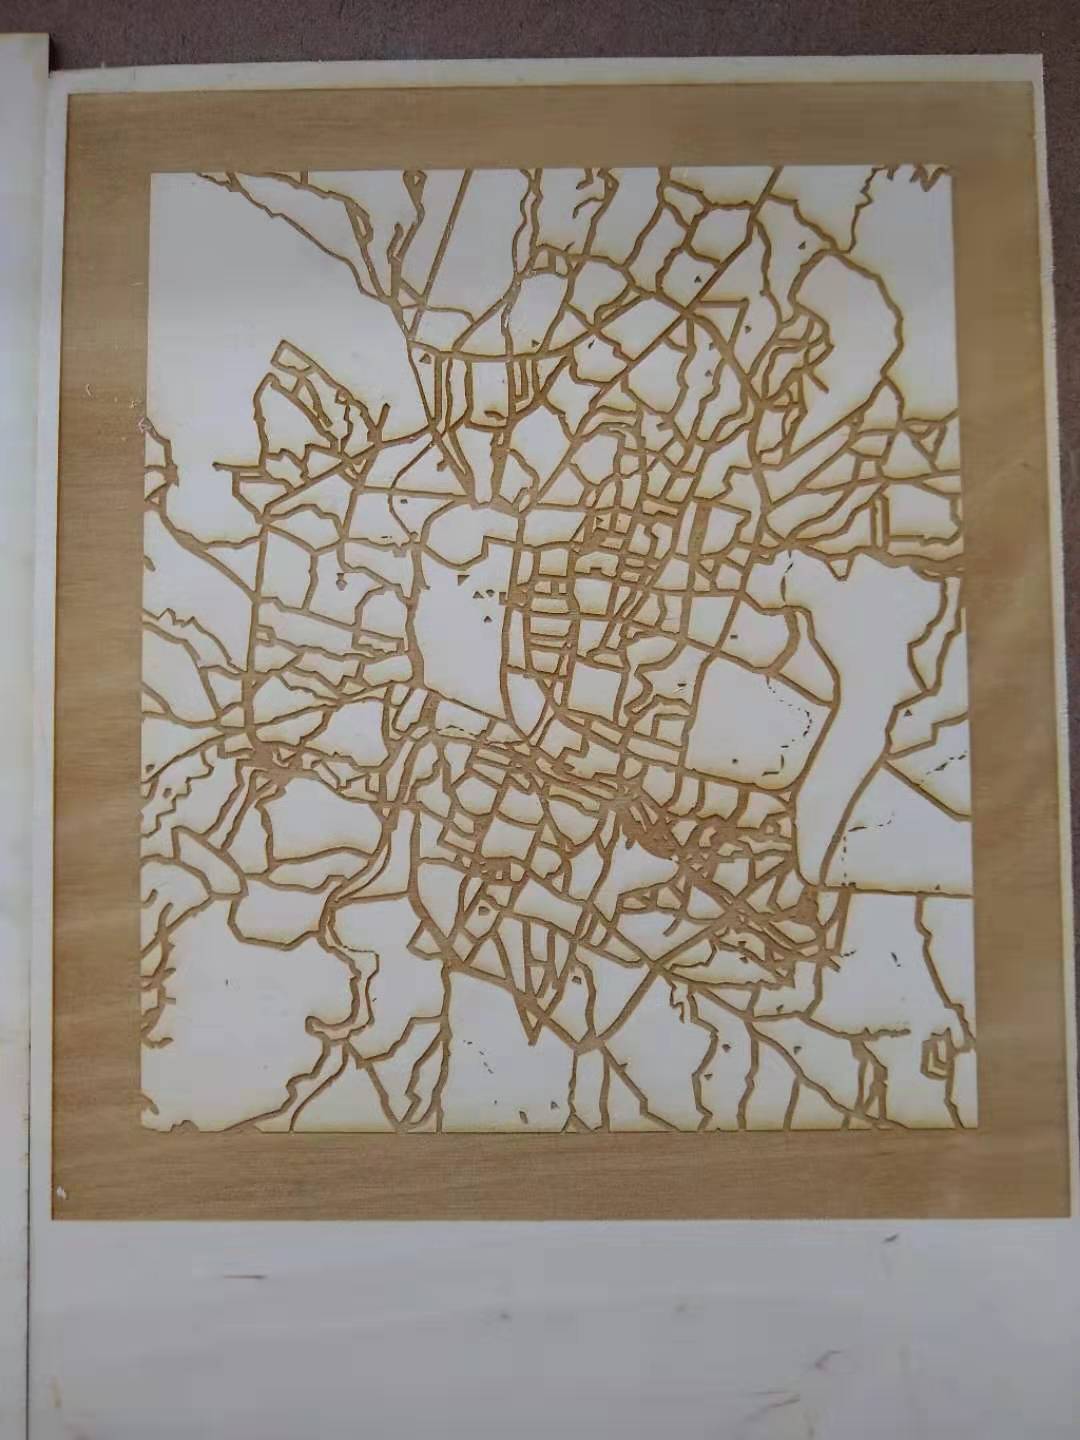 A city map etched onto wood.